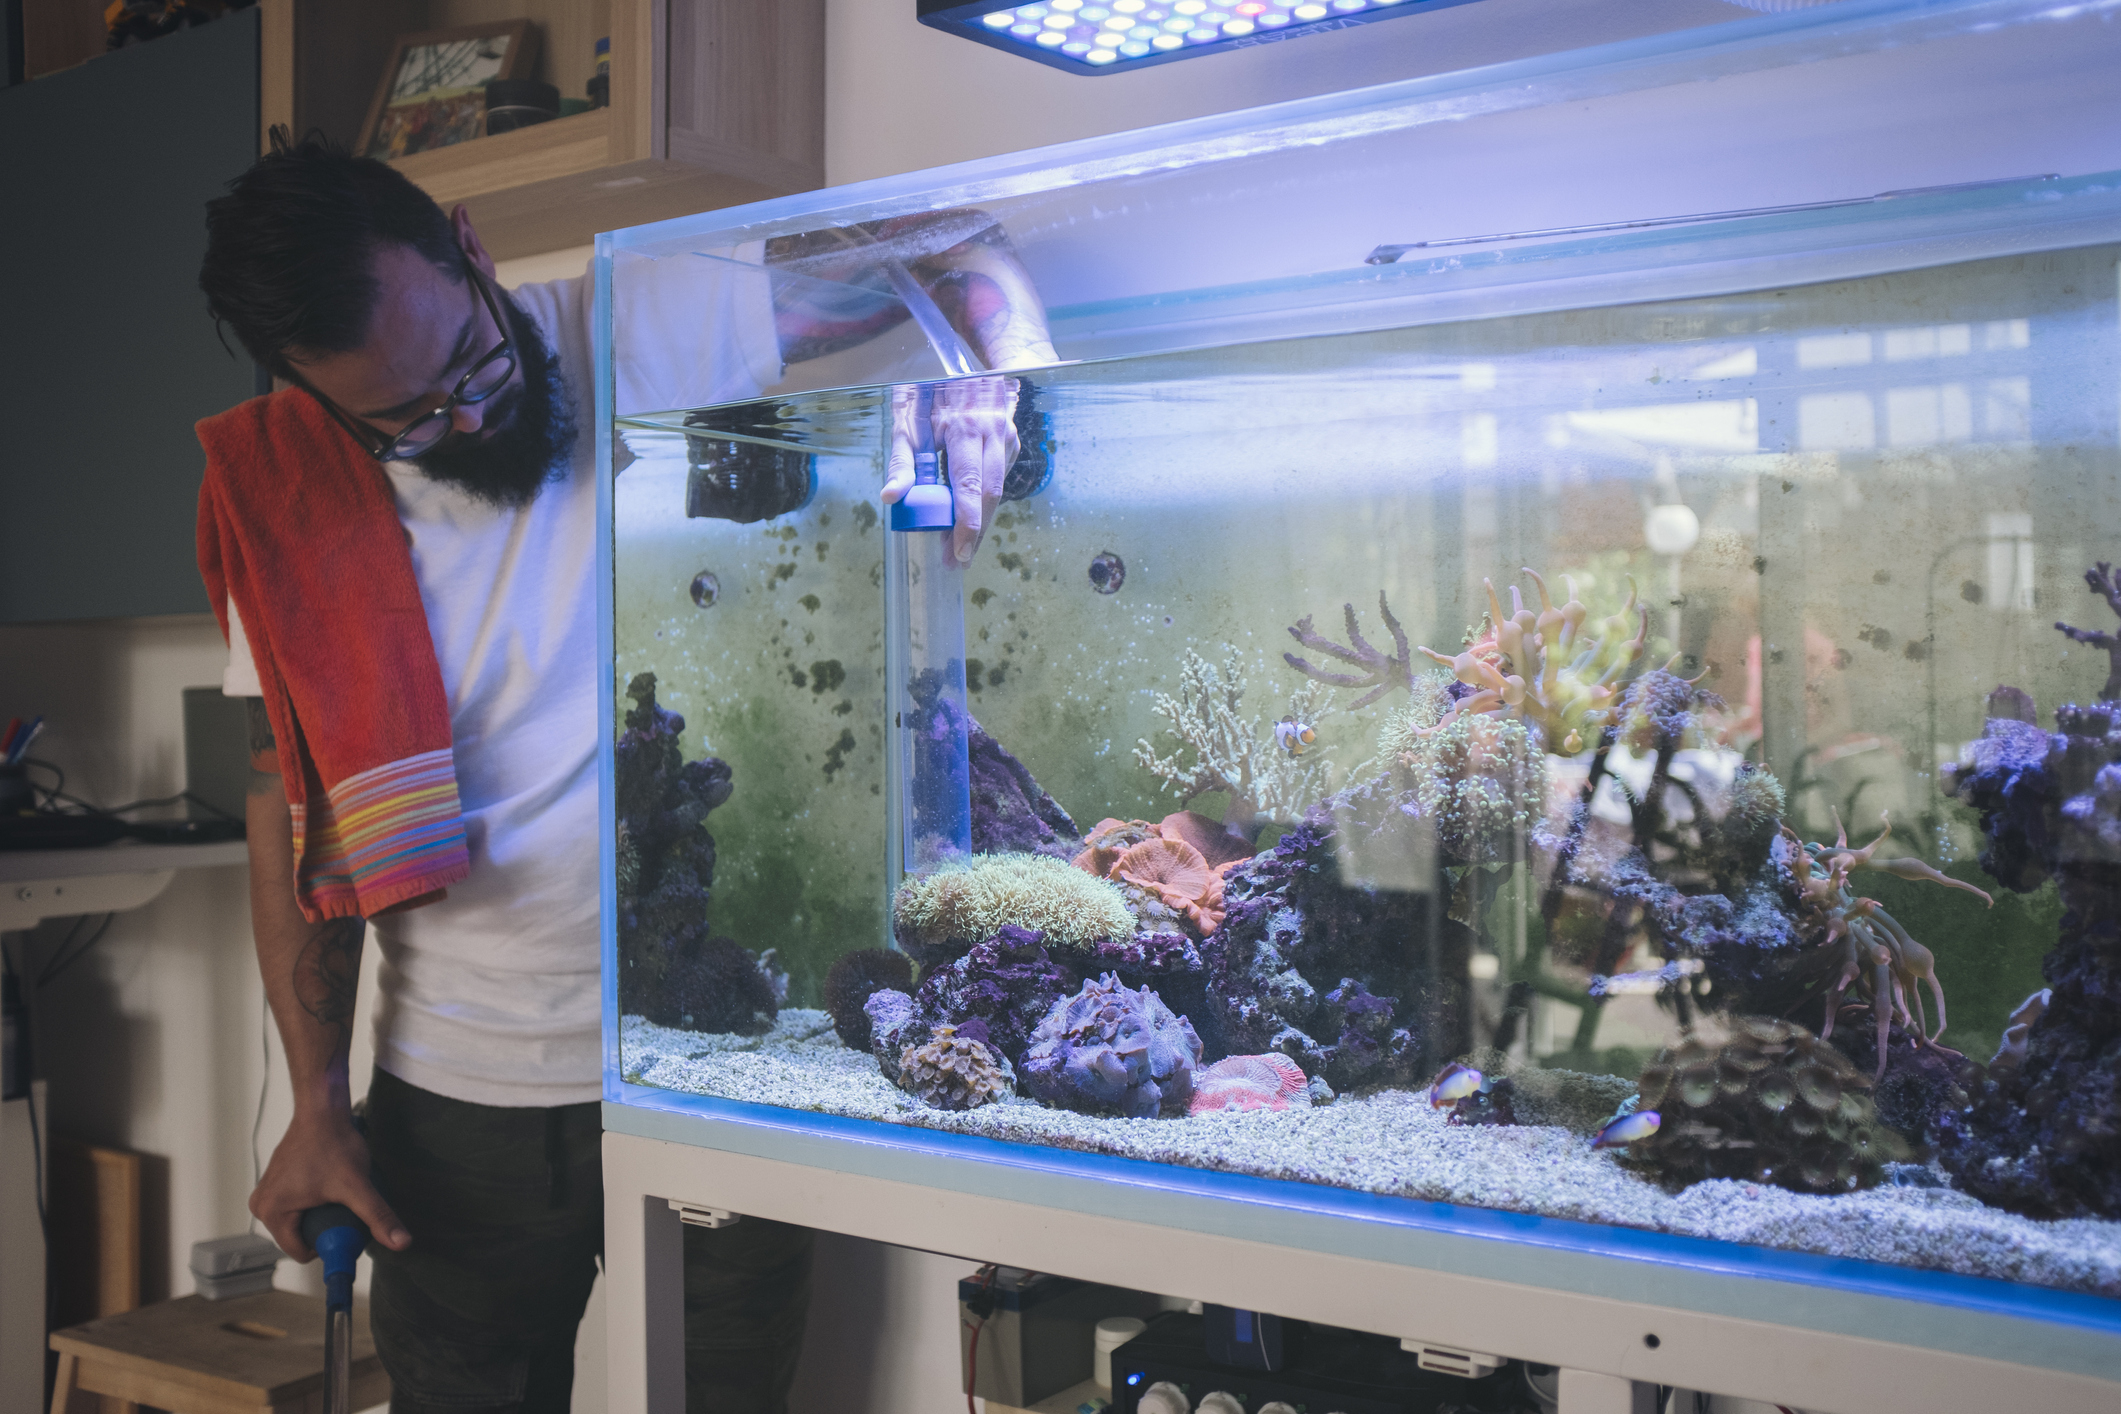 A man is taking care of his fish tank